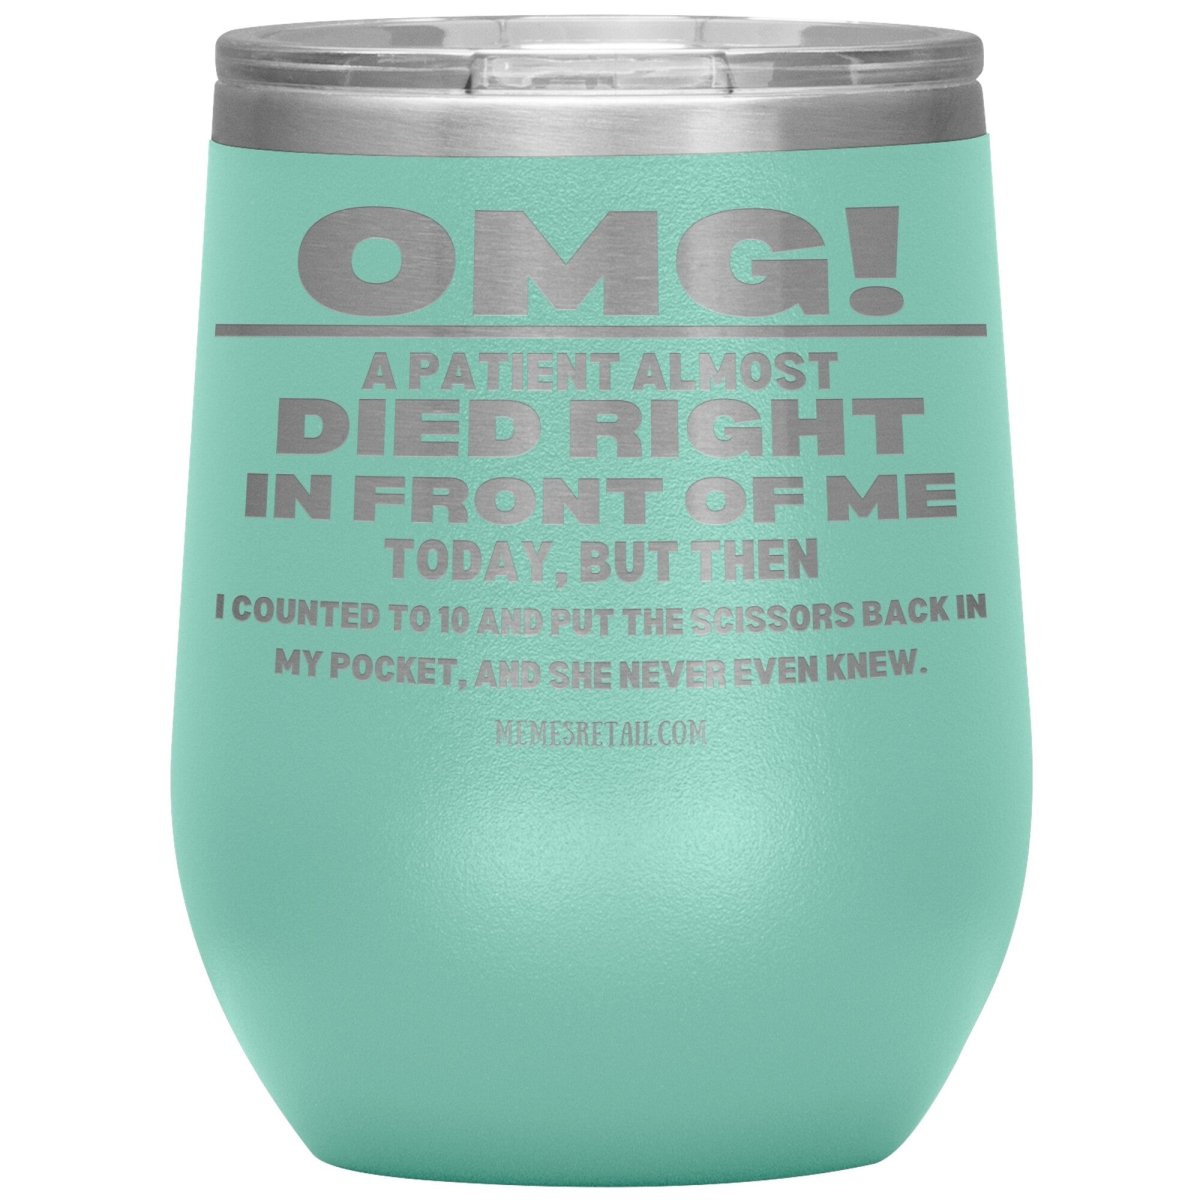 OMG! A Patient Almost Died Today Tumblers, 12oz Wine Insulated Tumbler / Teal - MemesRetail.com